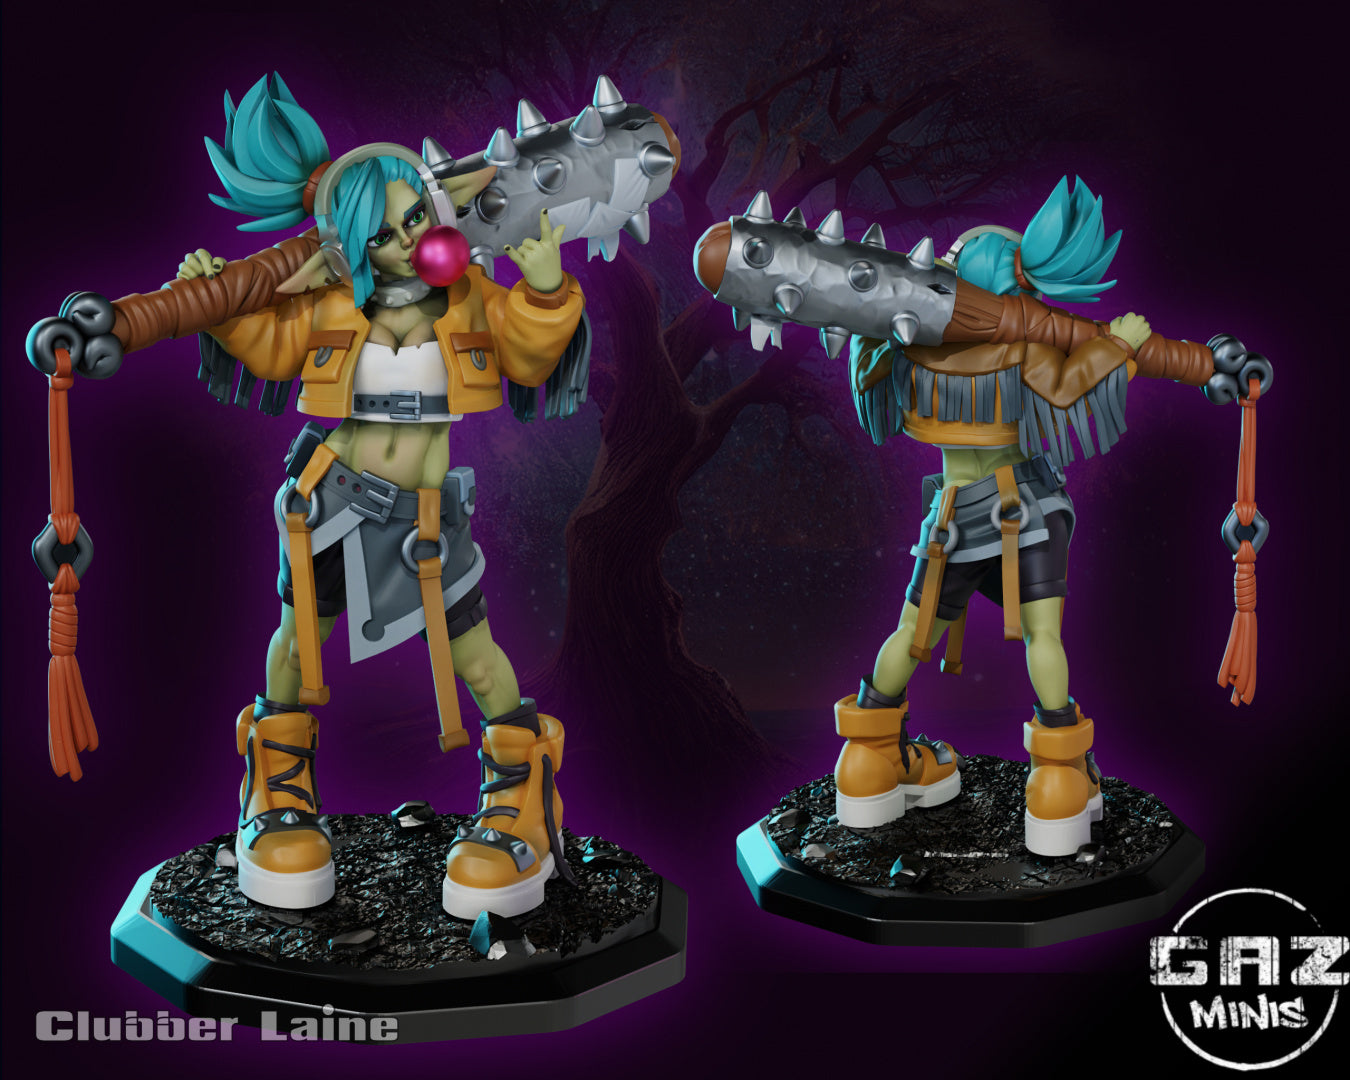 Clubber Laine from GAZ Minis